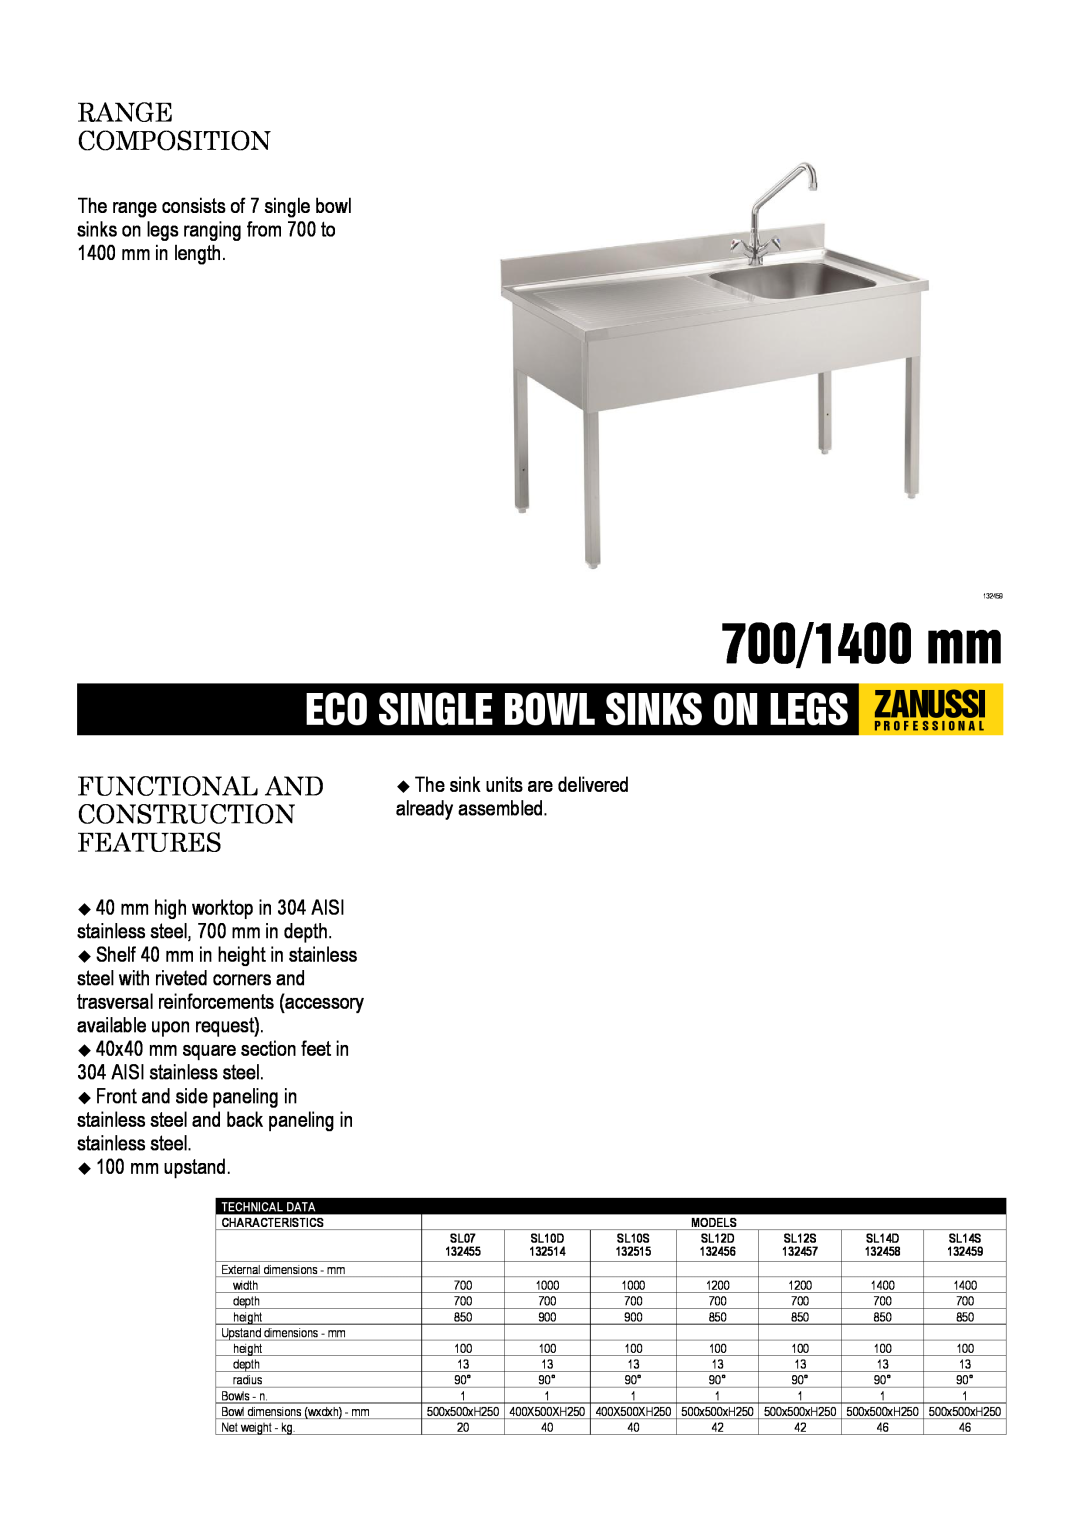 Zanussi SL10D, SL14D dimensions 700/1400 mm, Range Composition, Functional And Construction Features, AISI stainless steel 